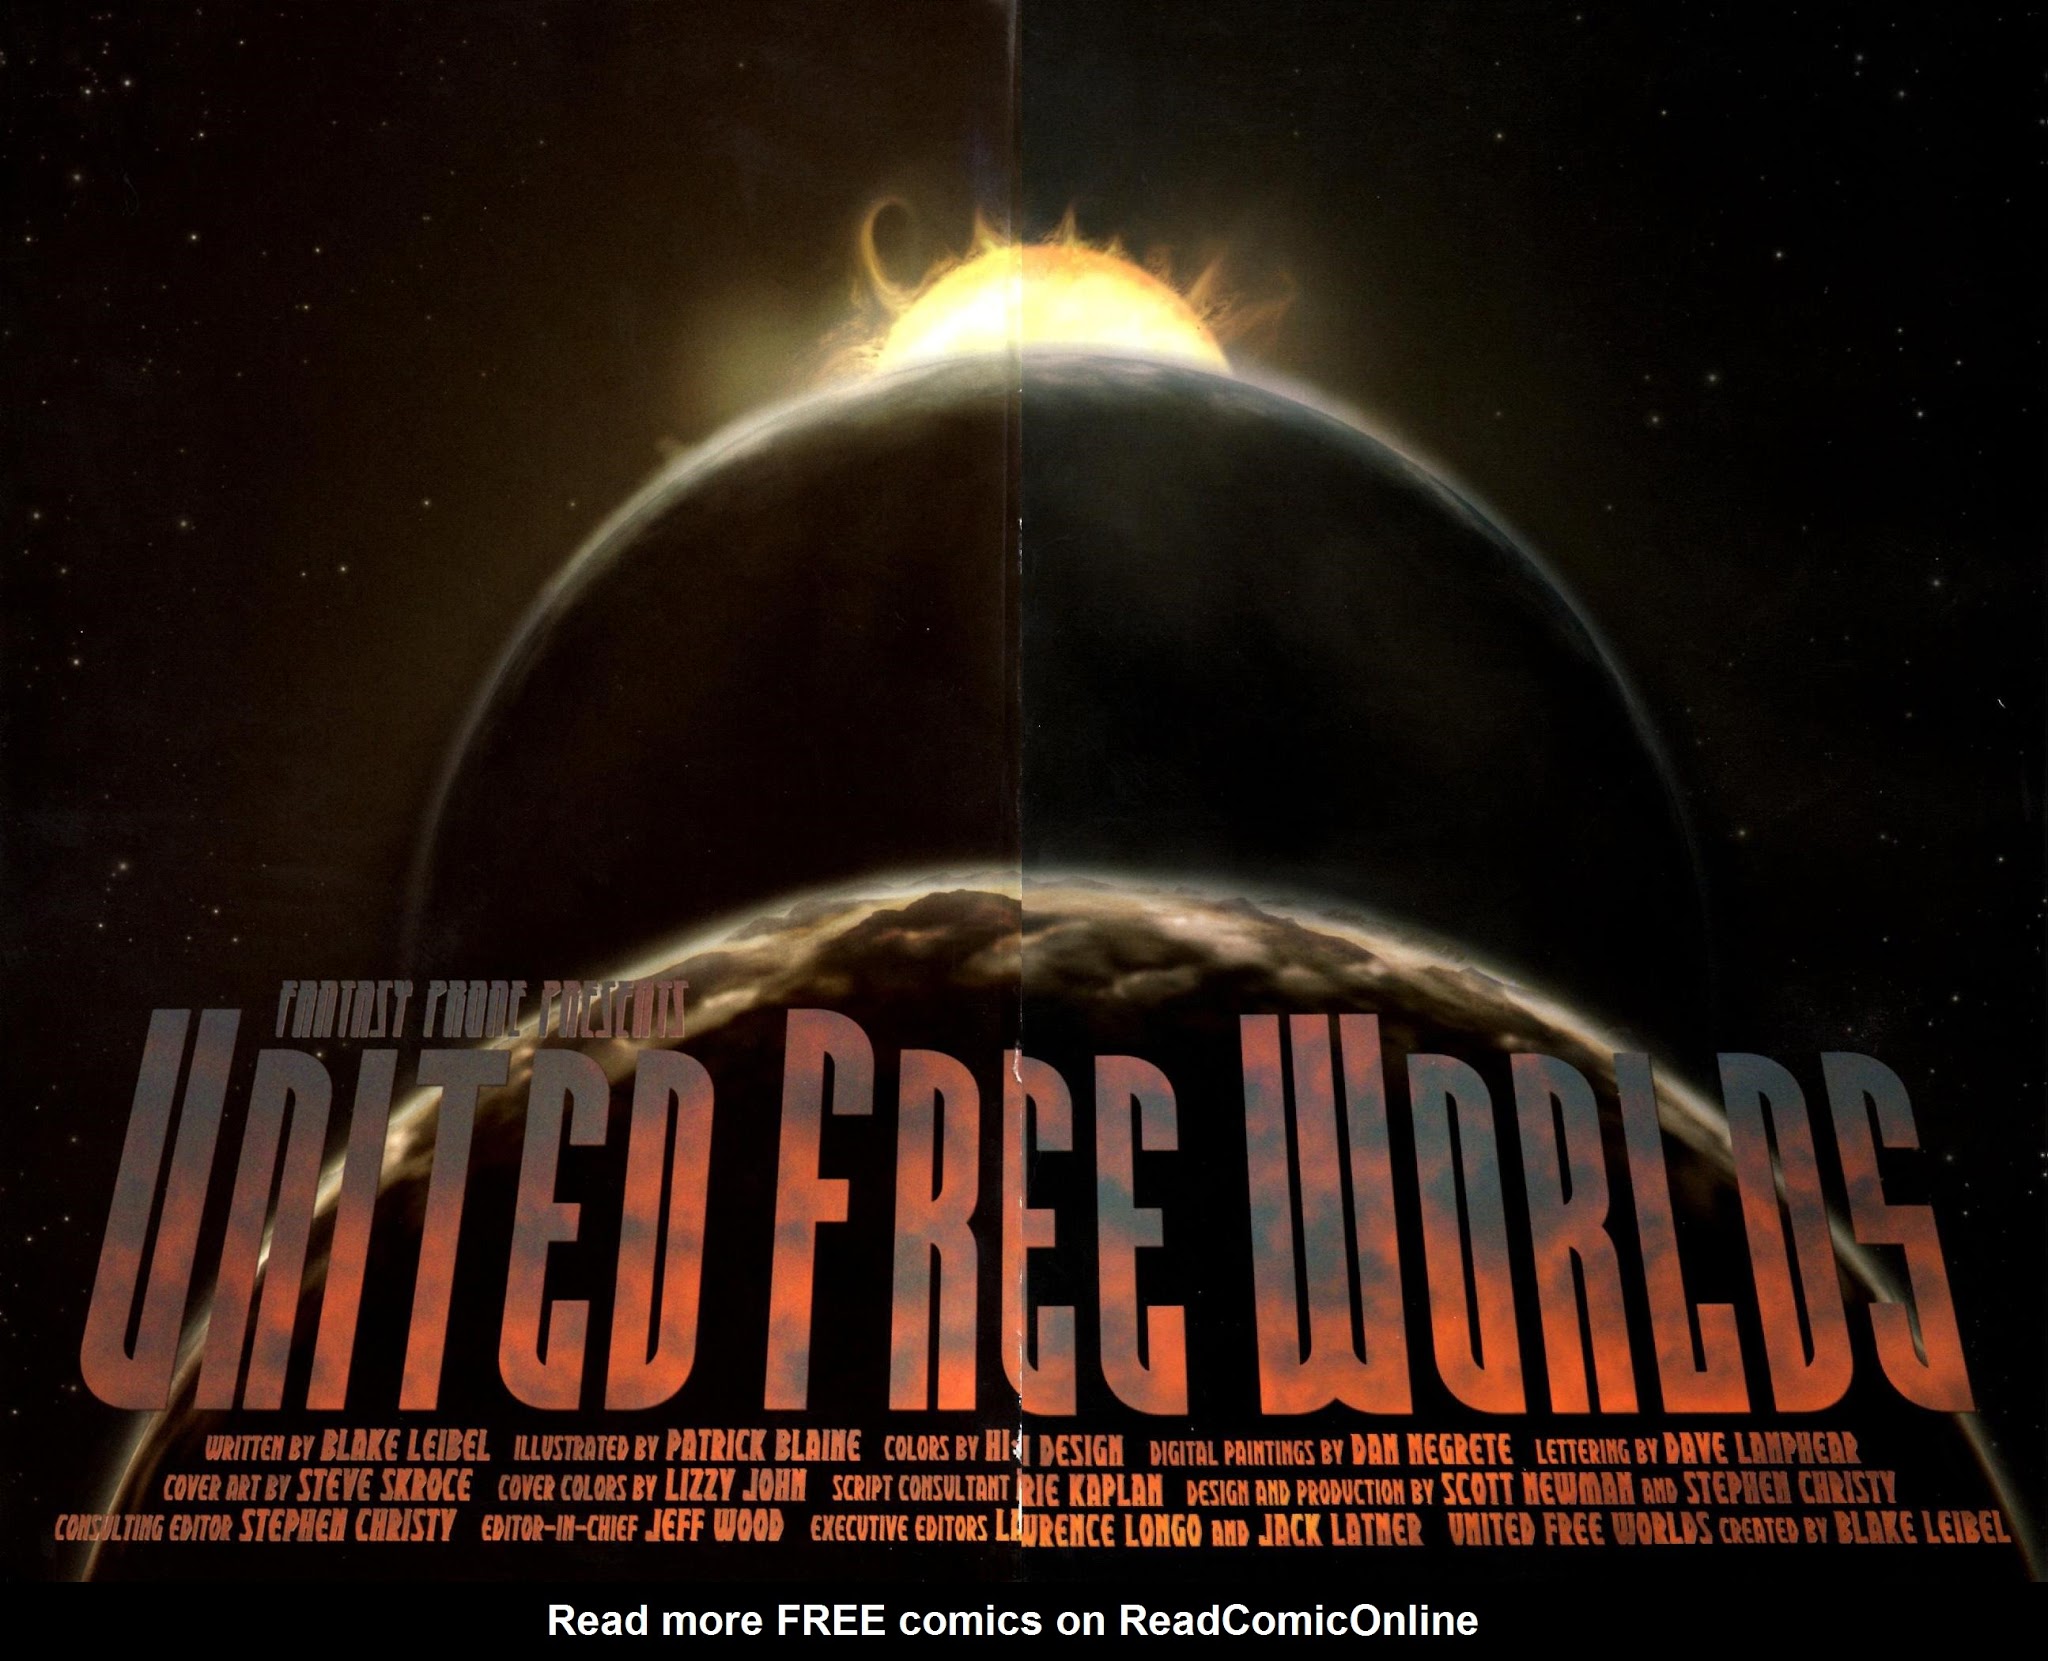 Read online United Free Worlds comic -  Issue #7 - 5